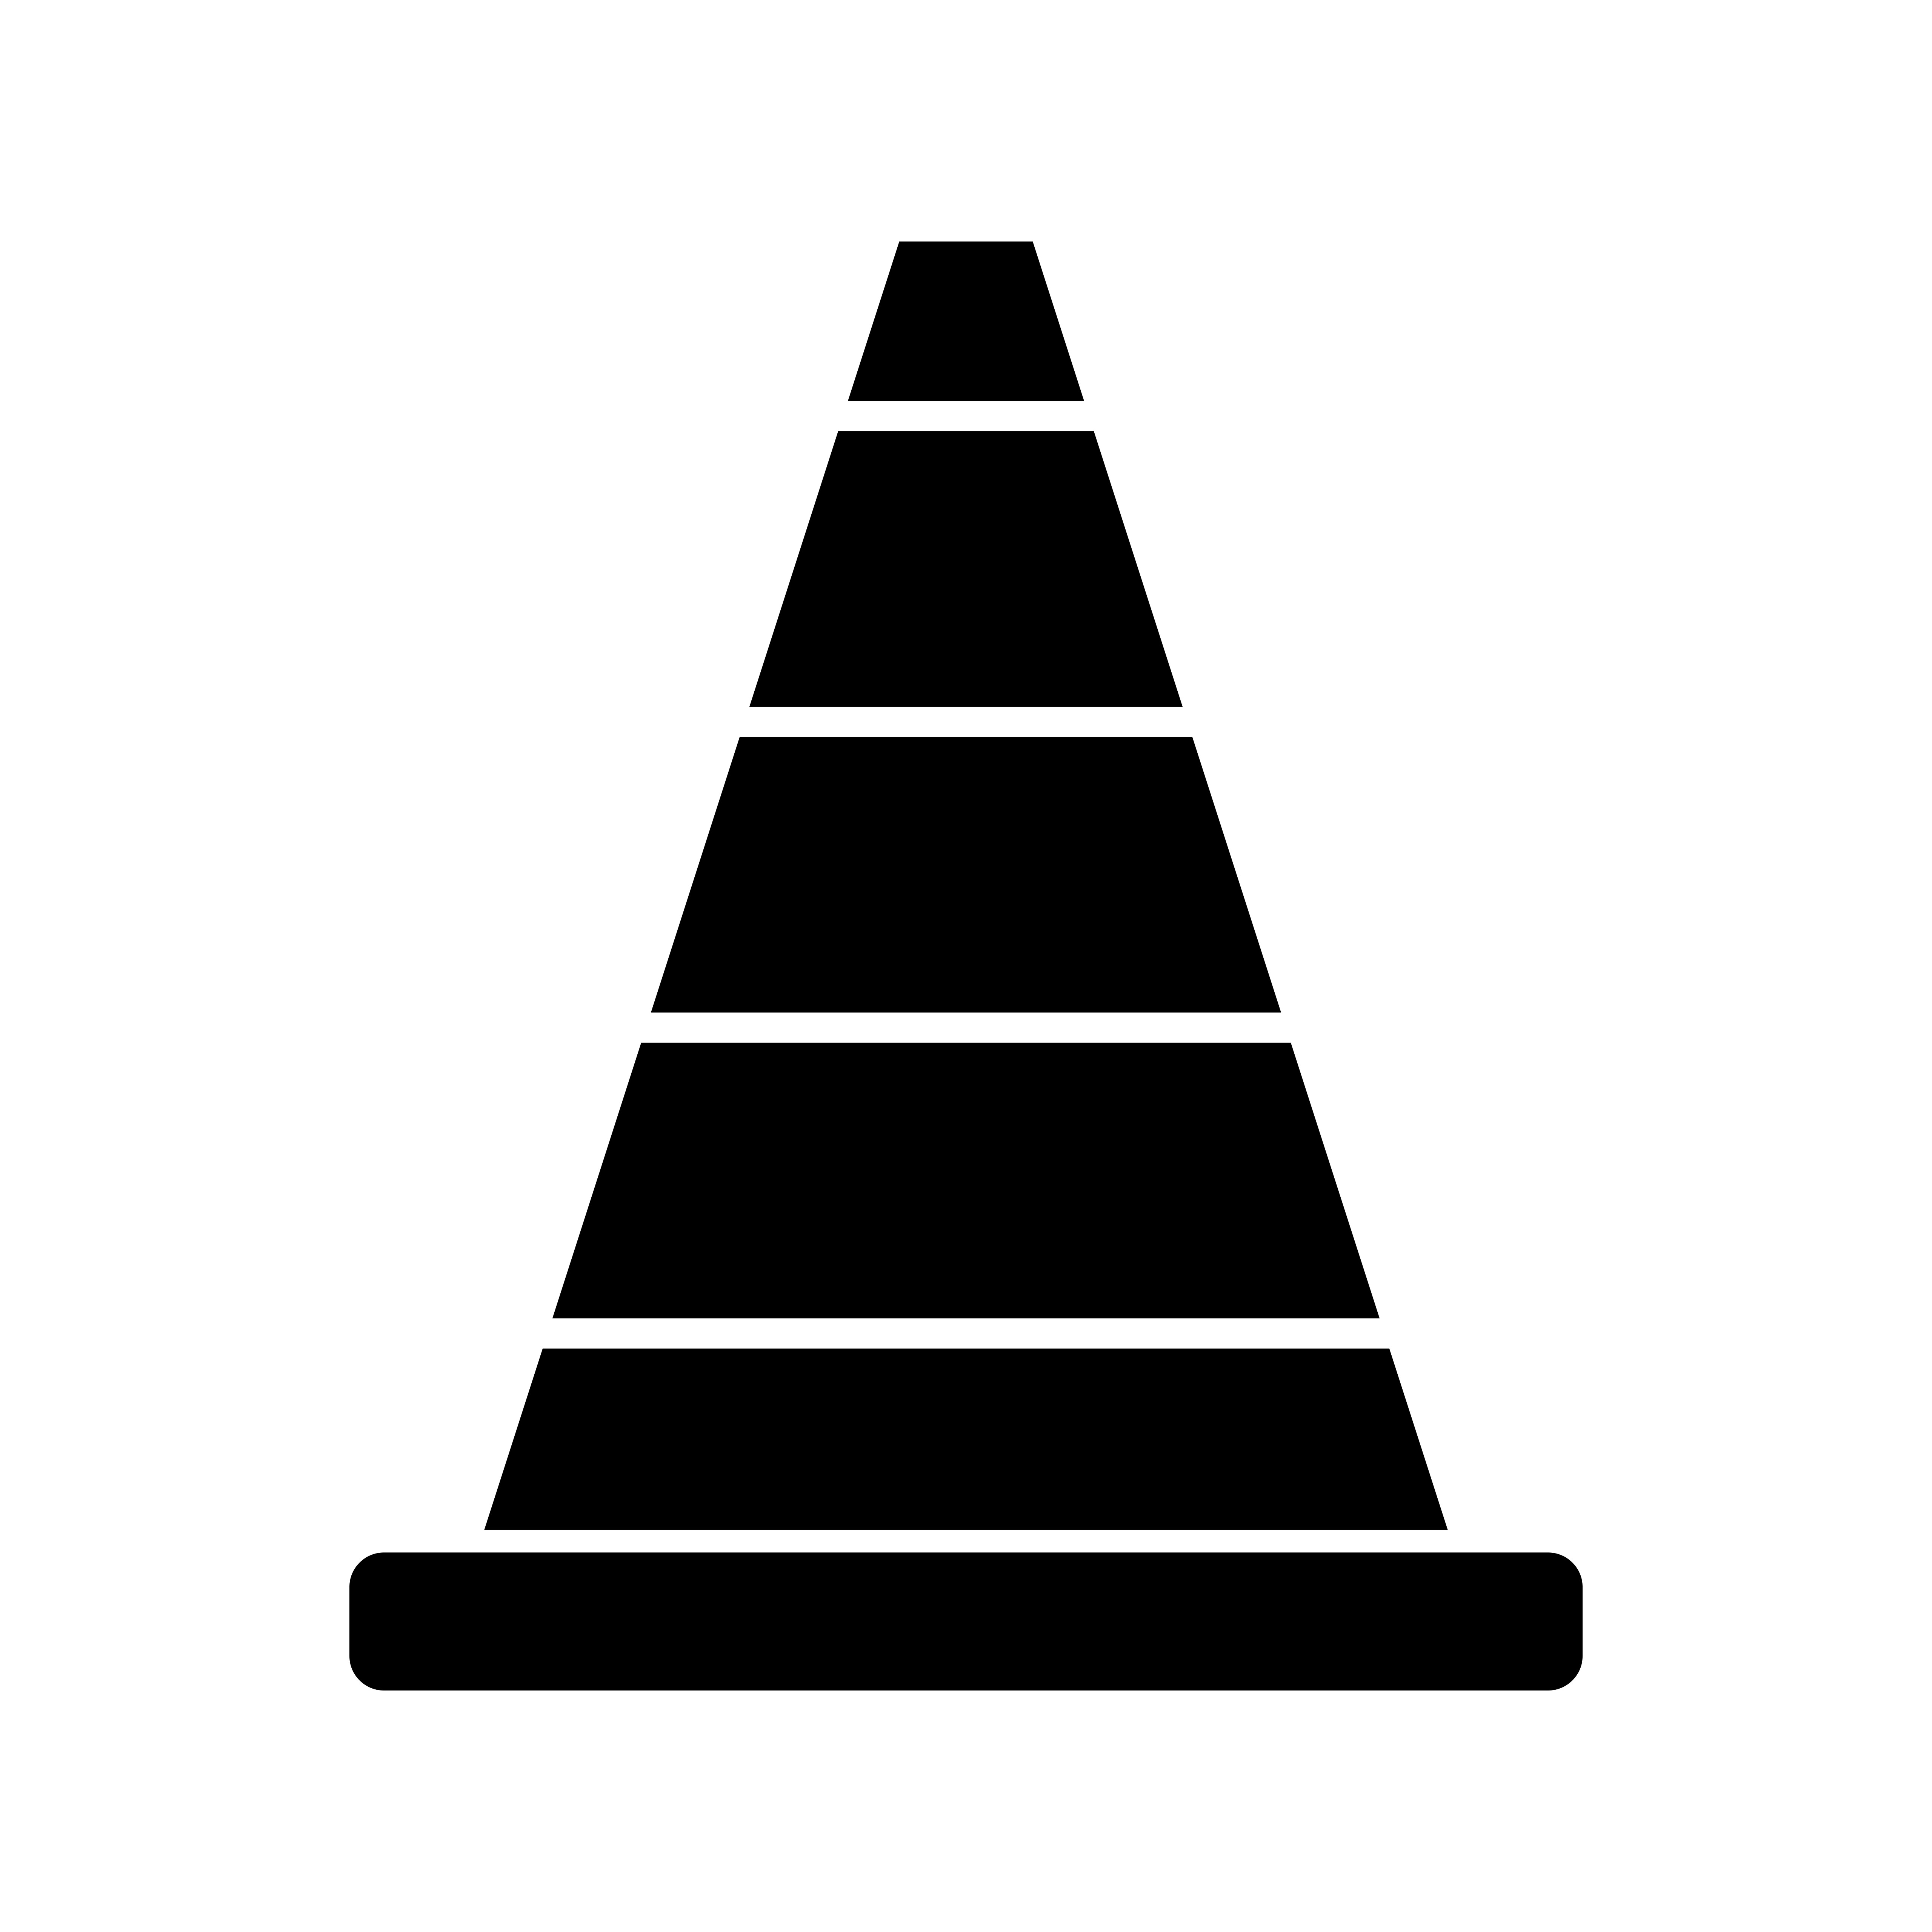 Download the Construction cone 330660